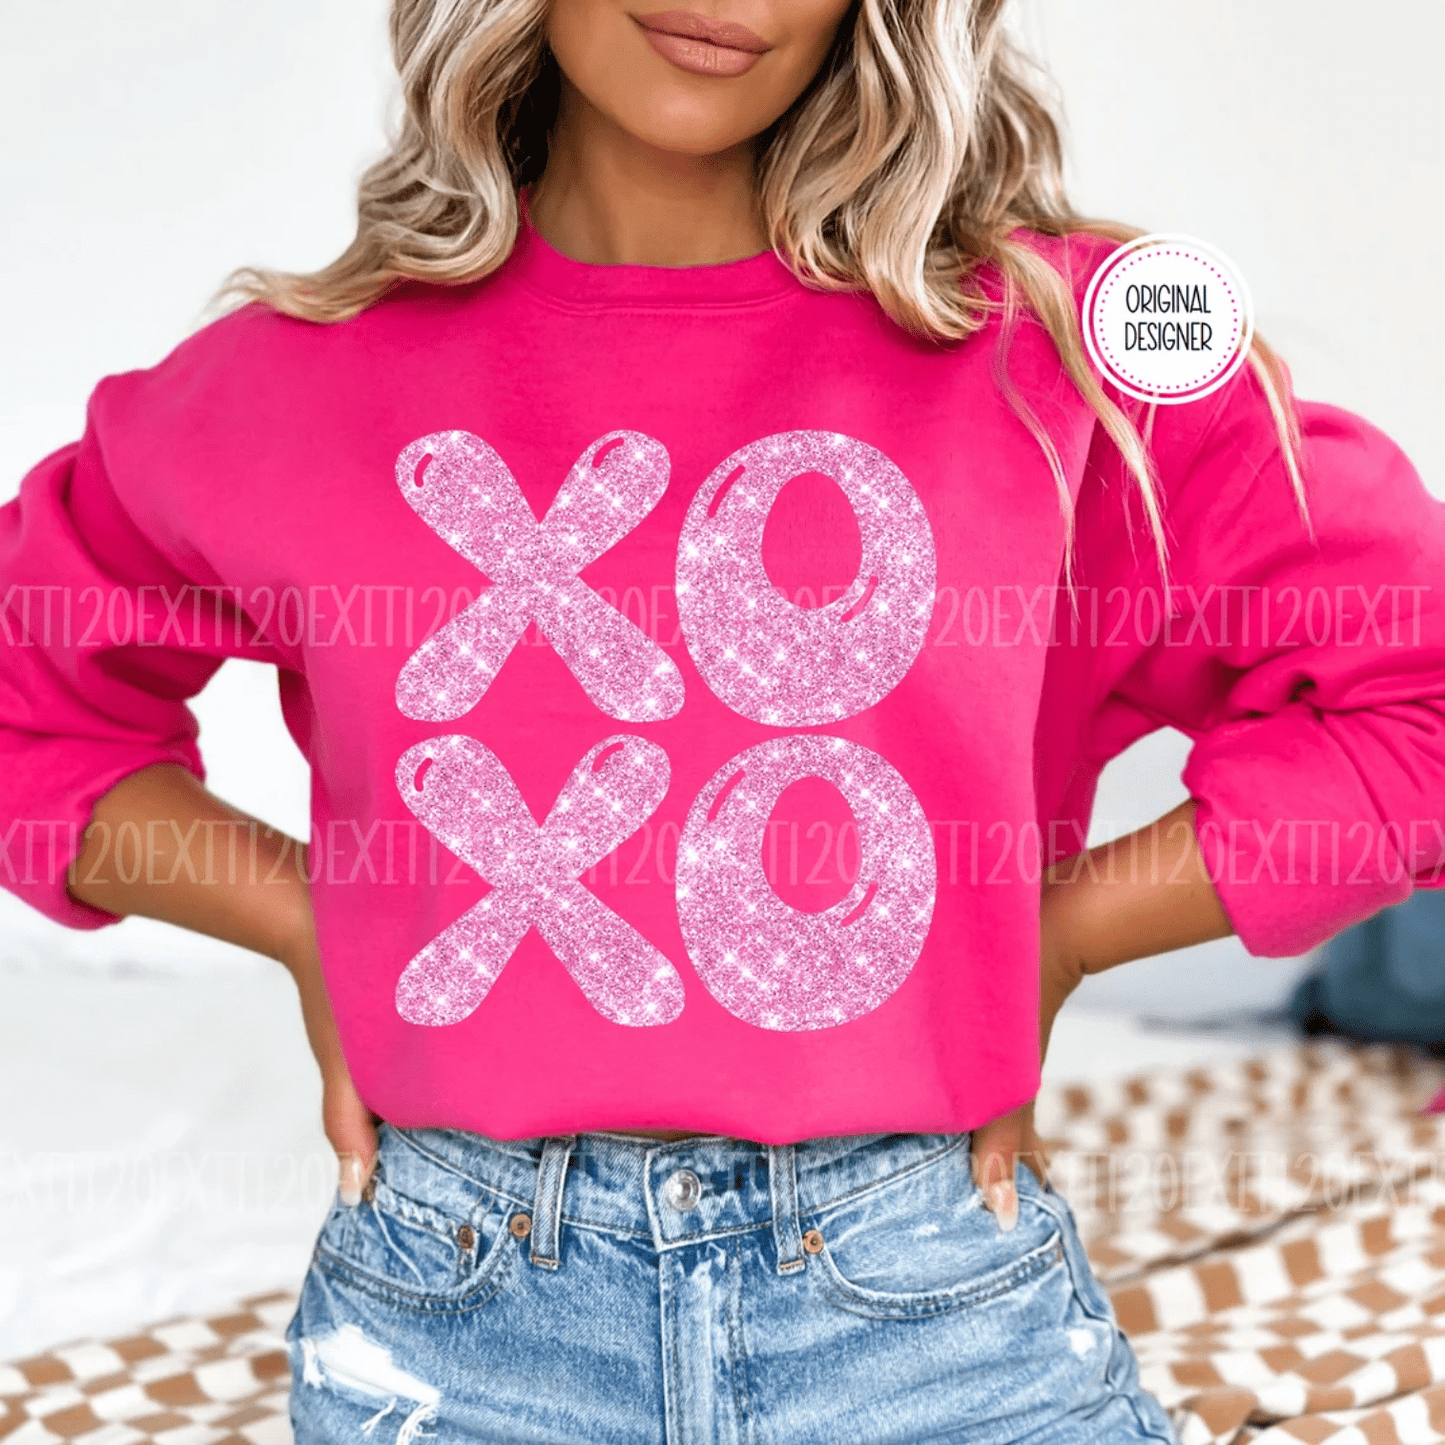 XOXO pink Valentine's ADULT DTF TRANSFERPRINT TO ORDER - Do it yourself Transfers